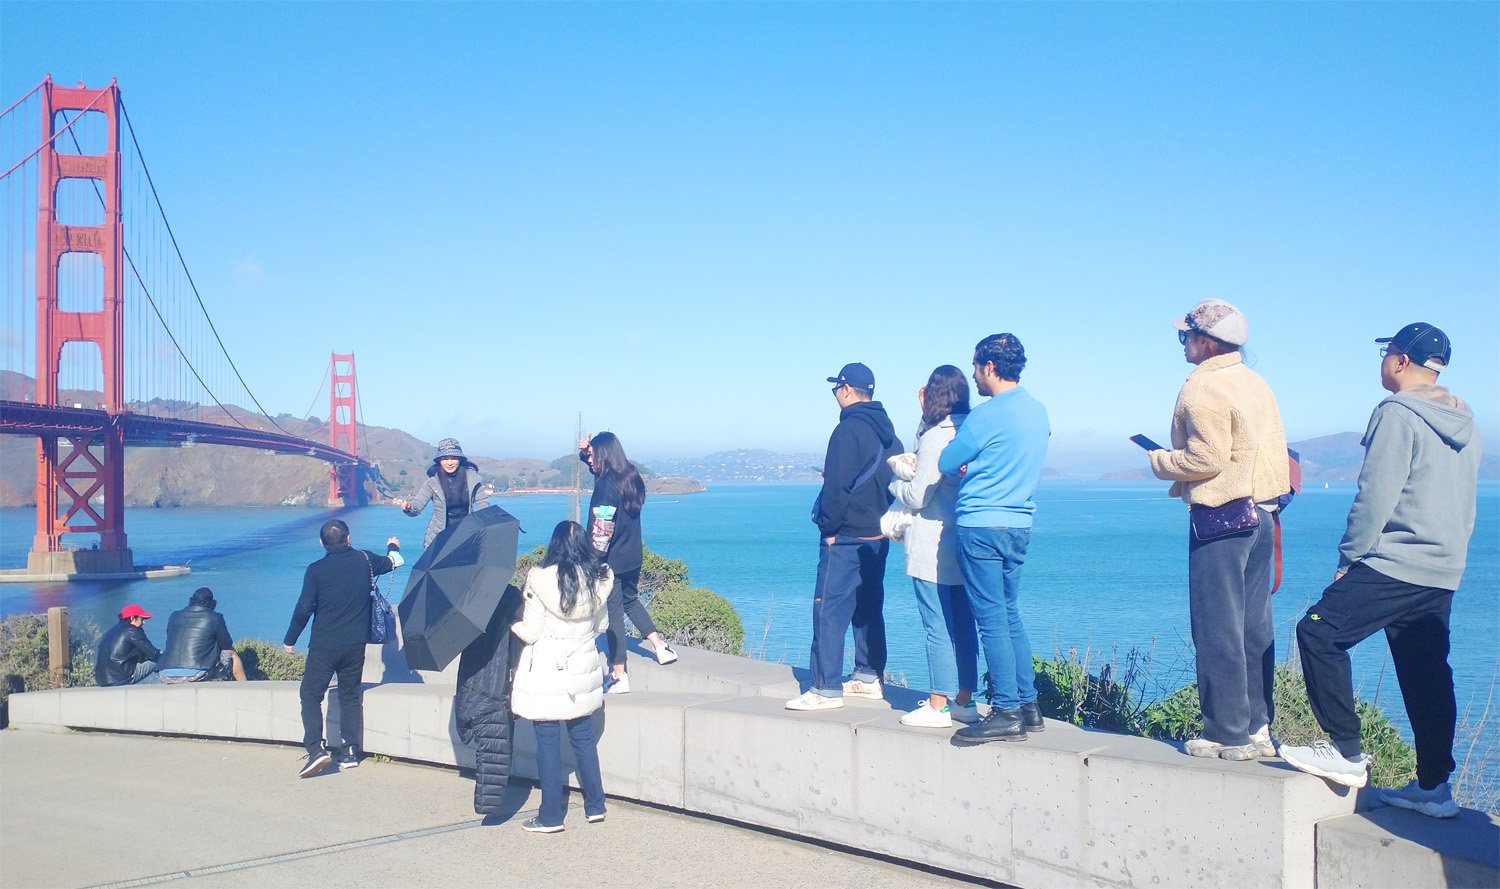 The line to take pictures to the Golden Gate bridge. 